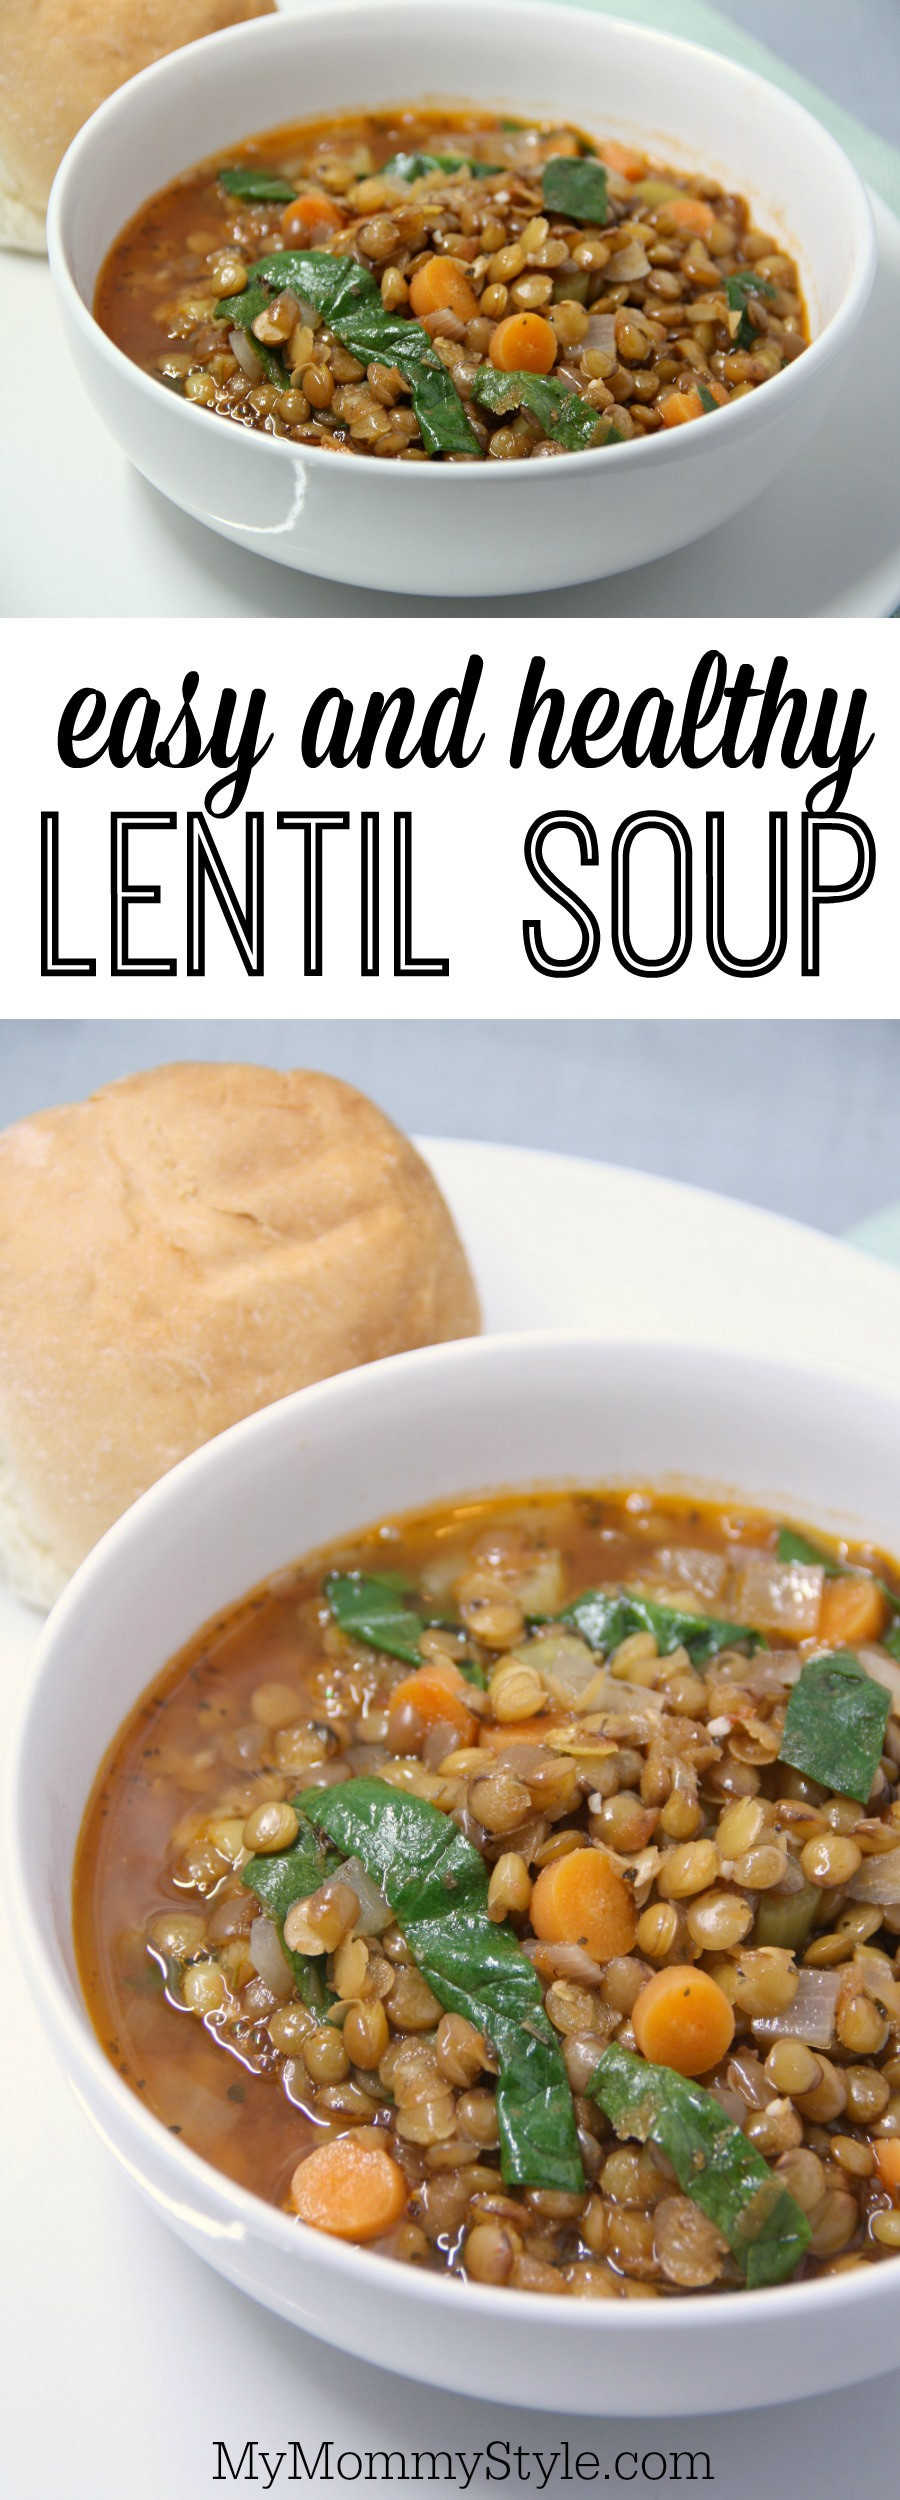 Easy Gluten Free Soup Recipes
 Easy and Healthy Lentil Soup My Mommy Style